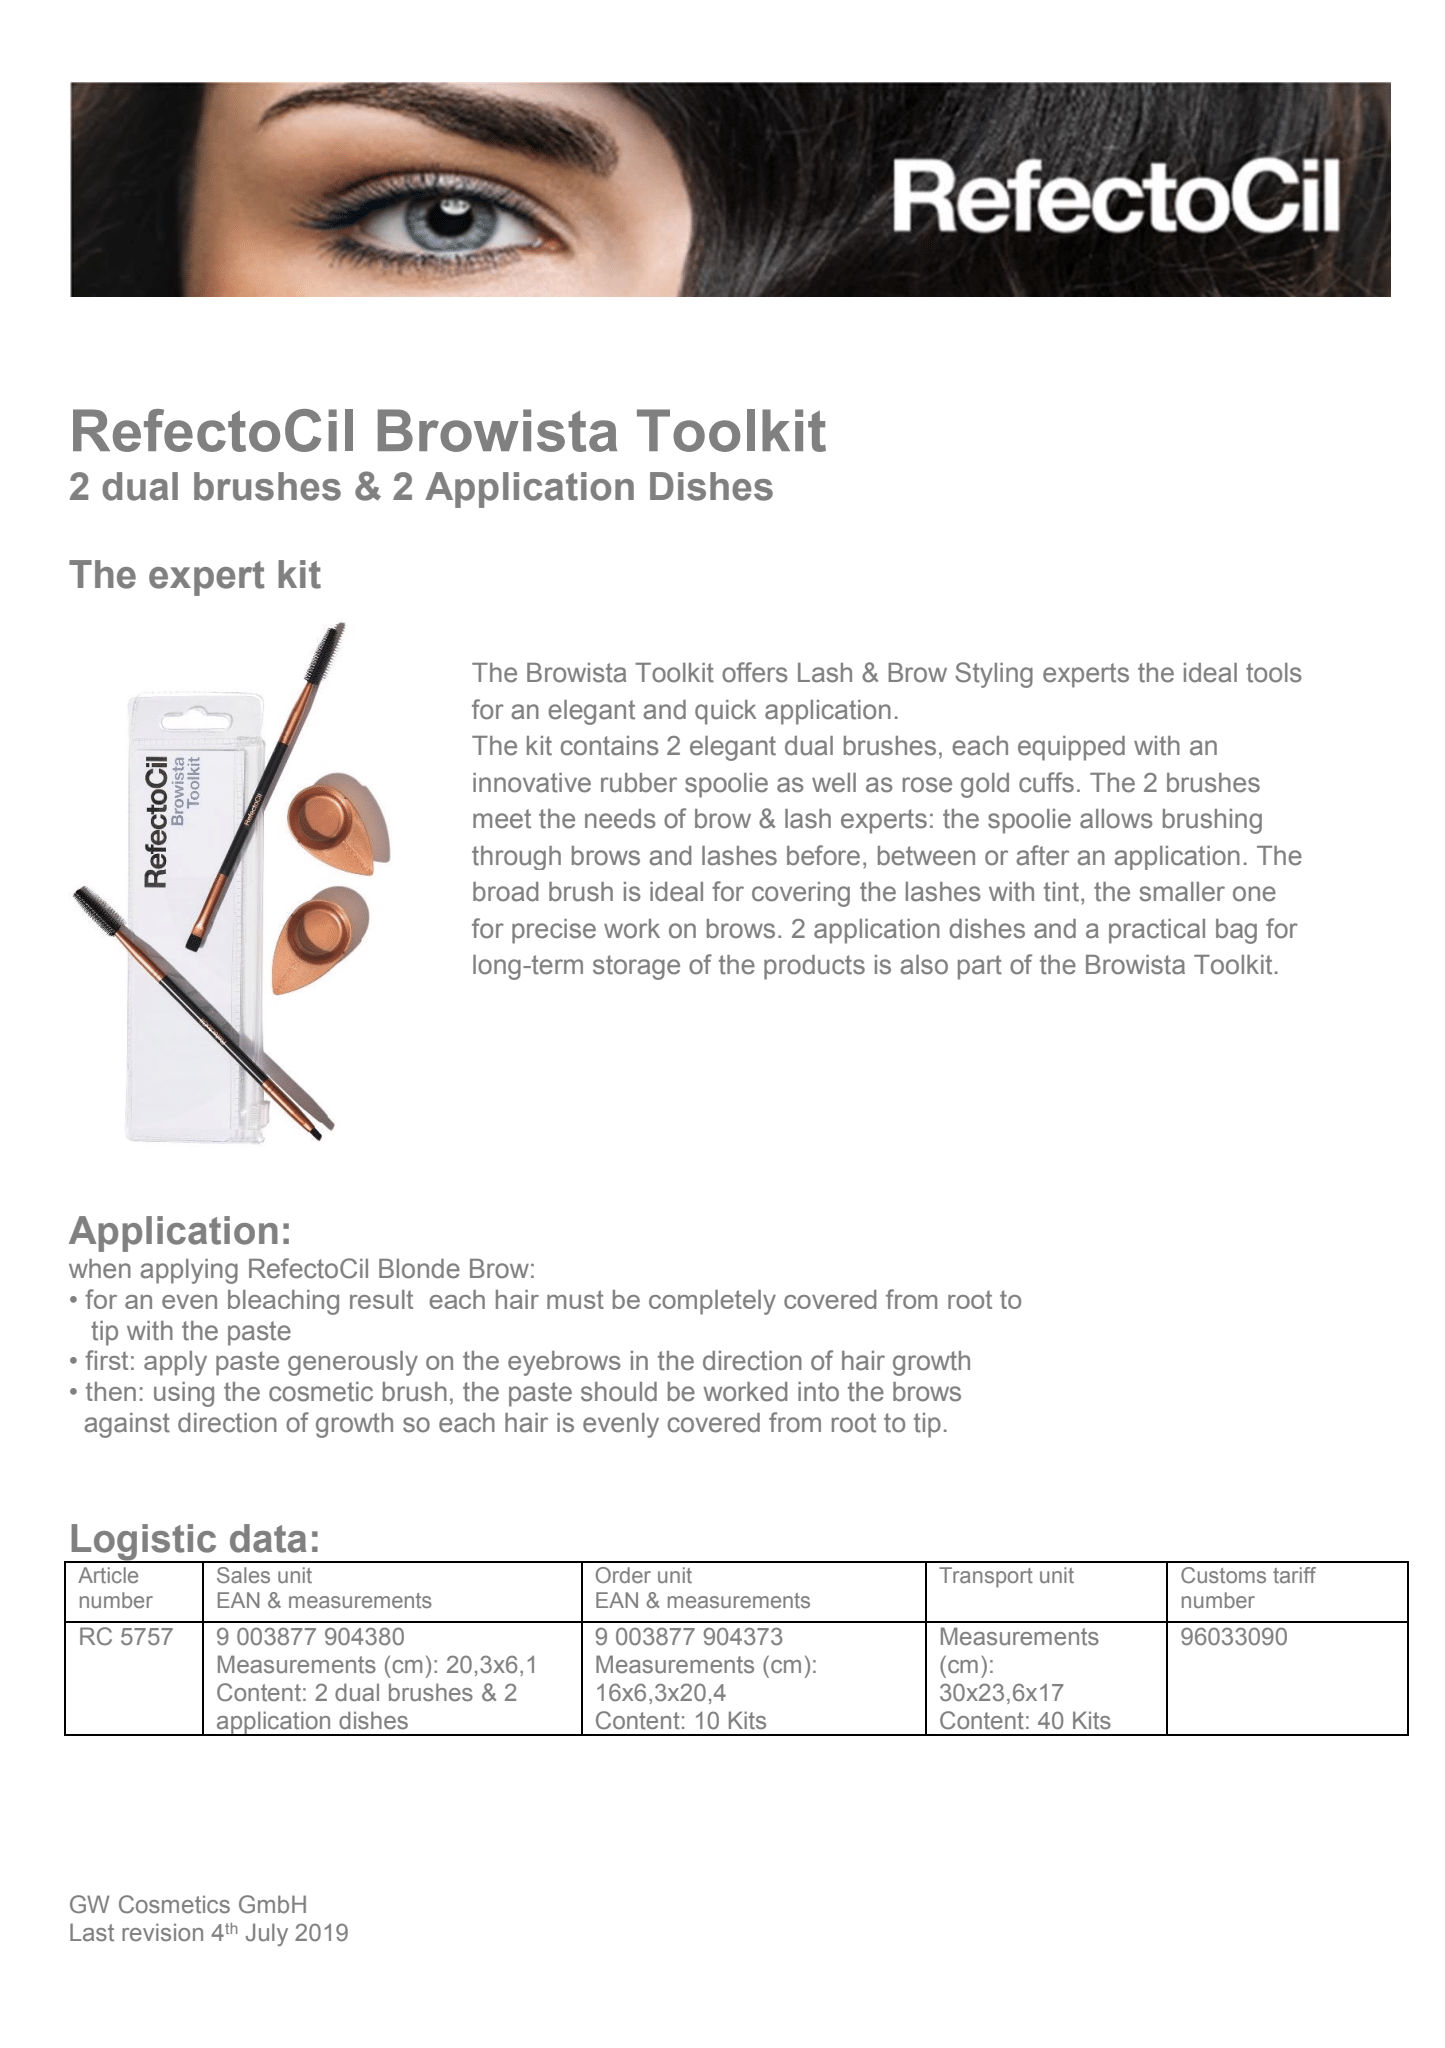 "RefectoCil Browista Toolkit Includes 2 brushes and 2 mini dishes"